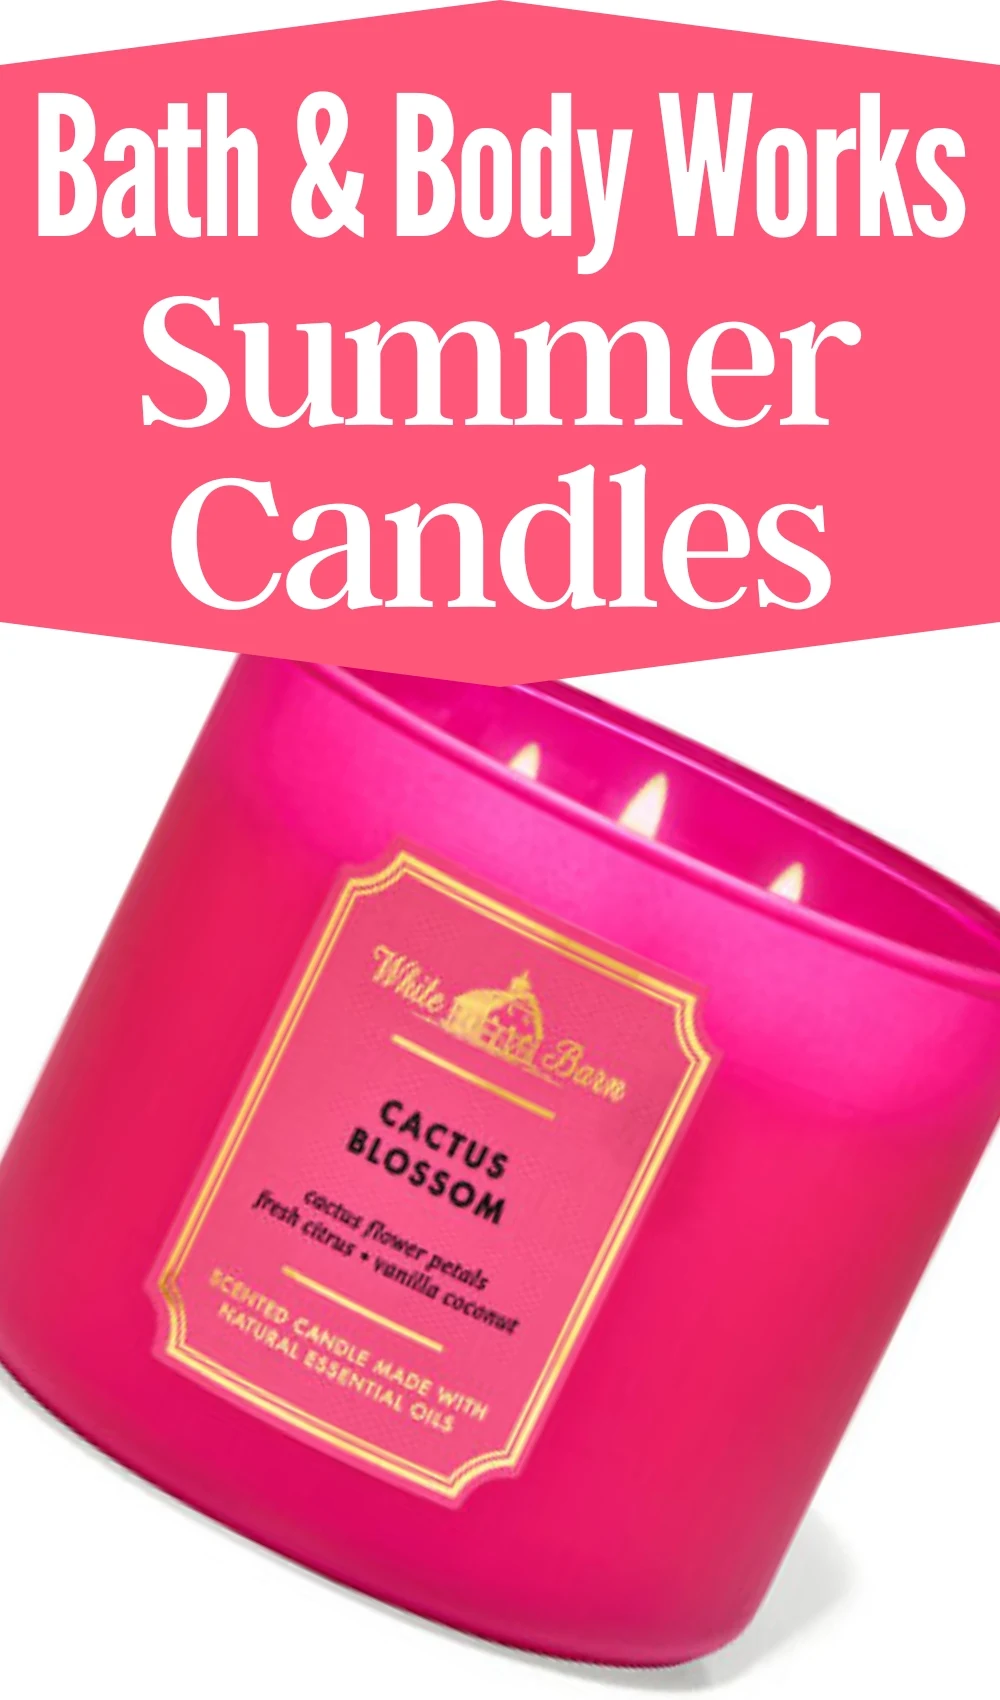 best bath and body works candles for summer - best summer bath and body works candles - best bath and body works summer scents - best summer candle scents - best candles for summer - best spring bath and body works scents - cactus blossom